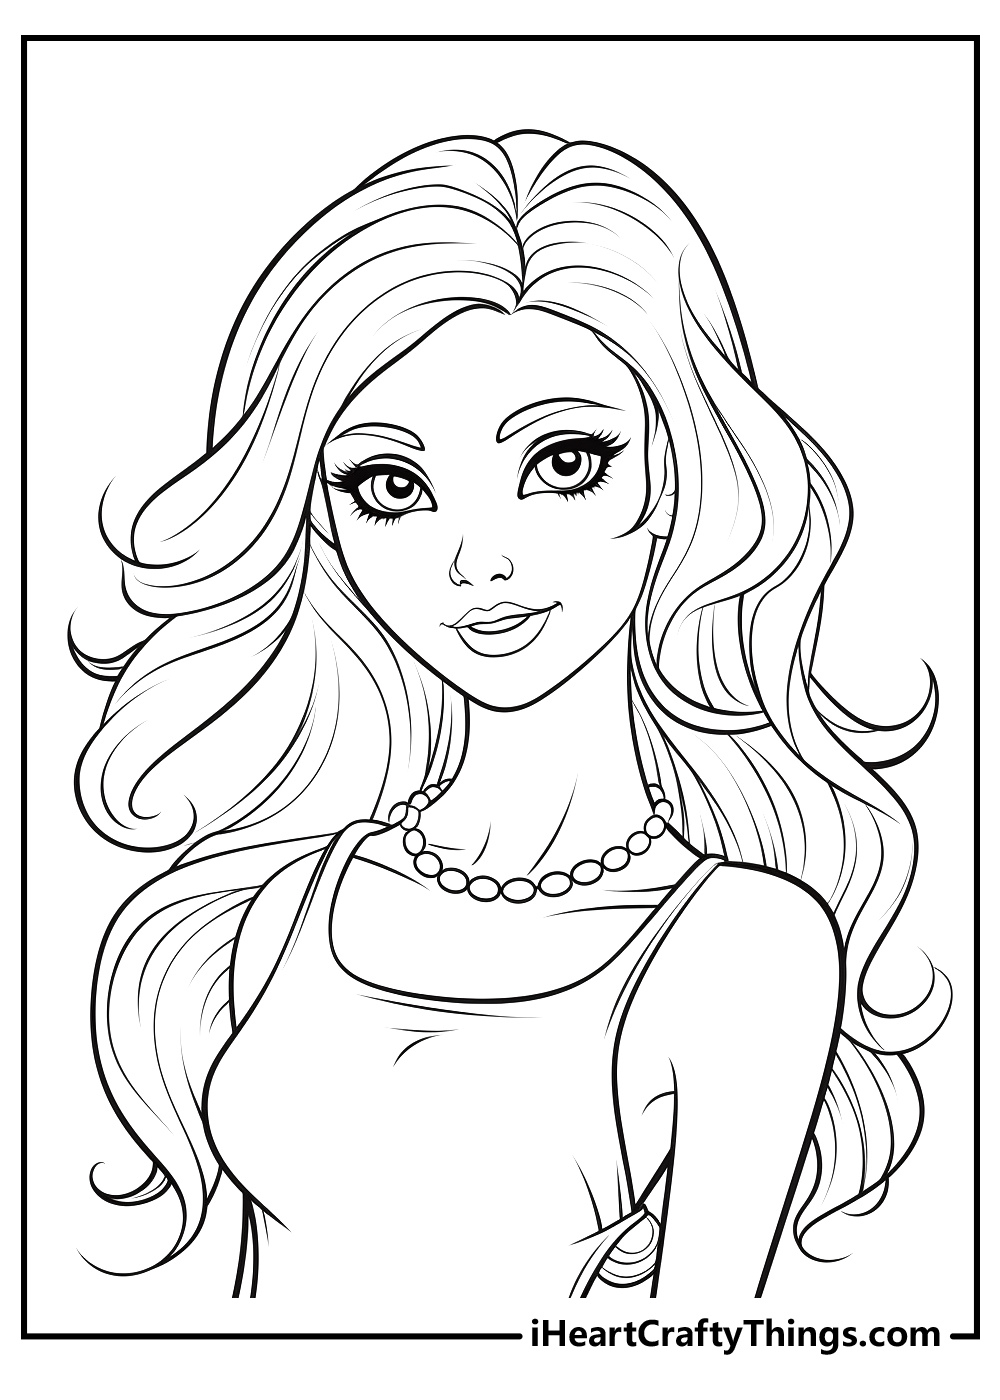 new barbie coloring sheet free download